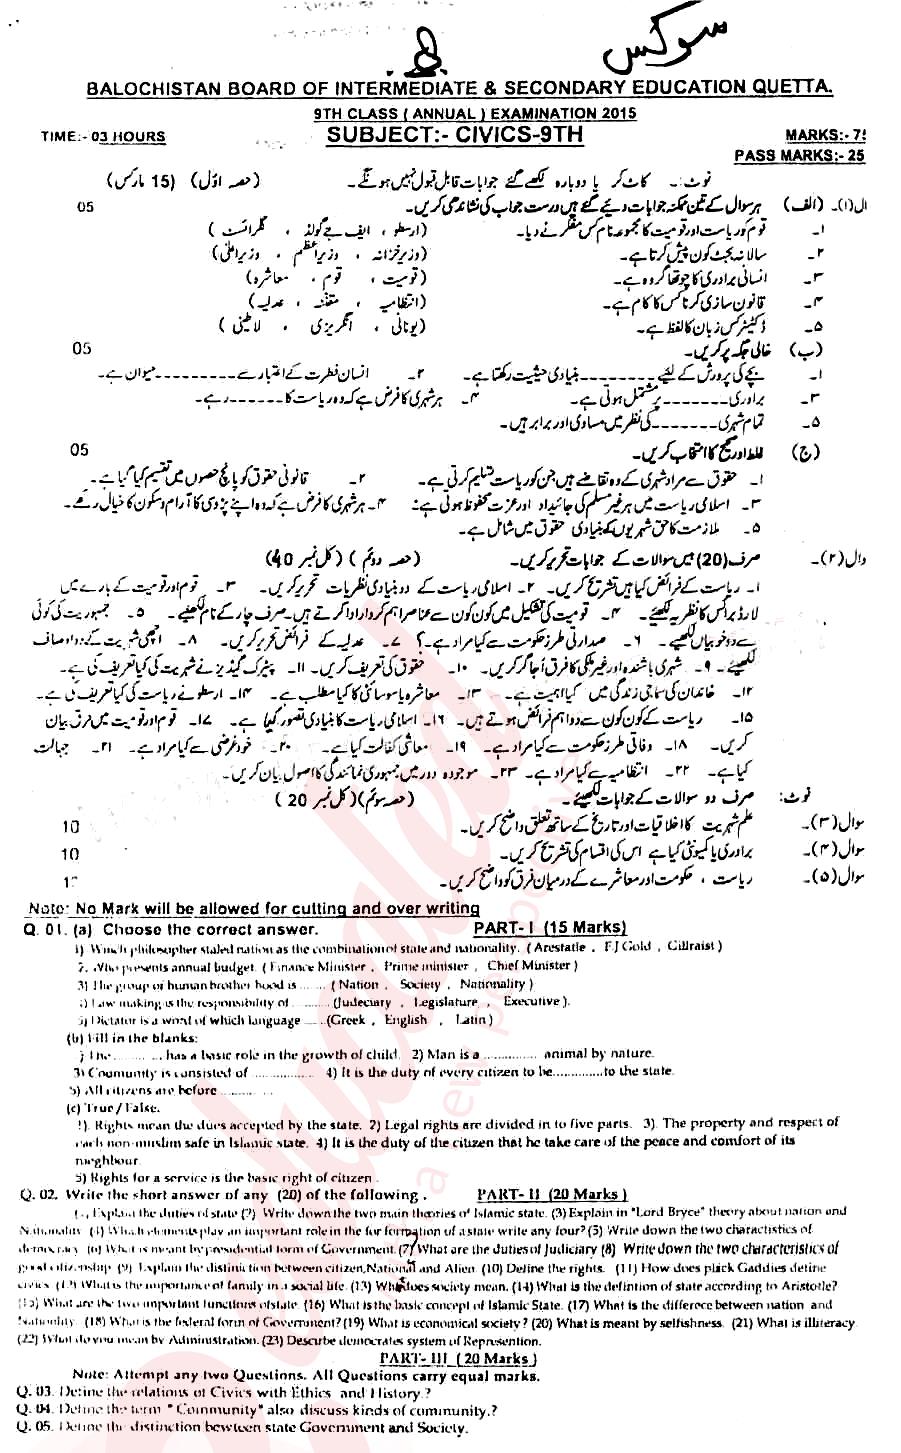 Civics 9th class Past Paper Group 1 BISE Quetta 2015